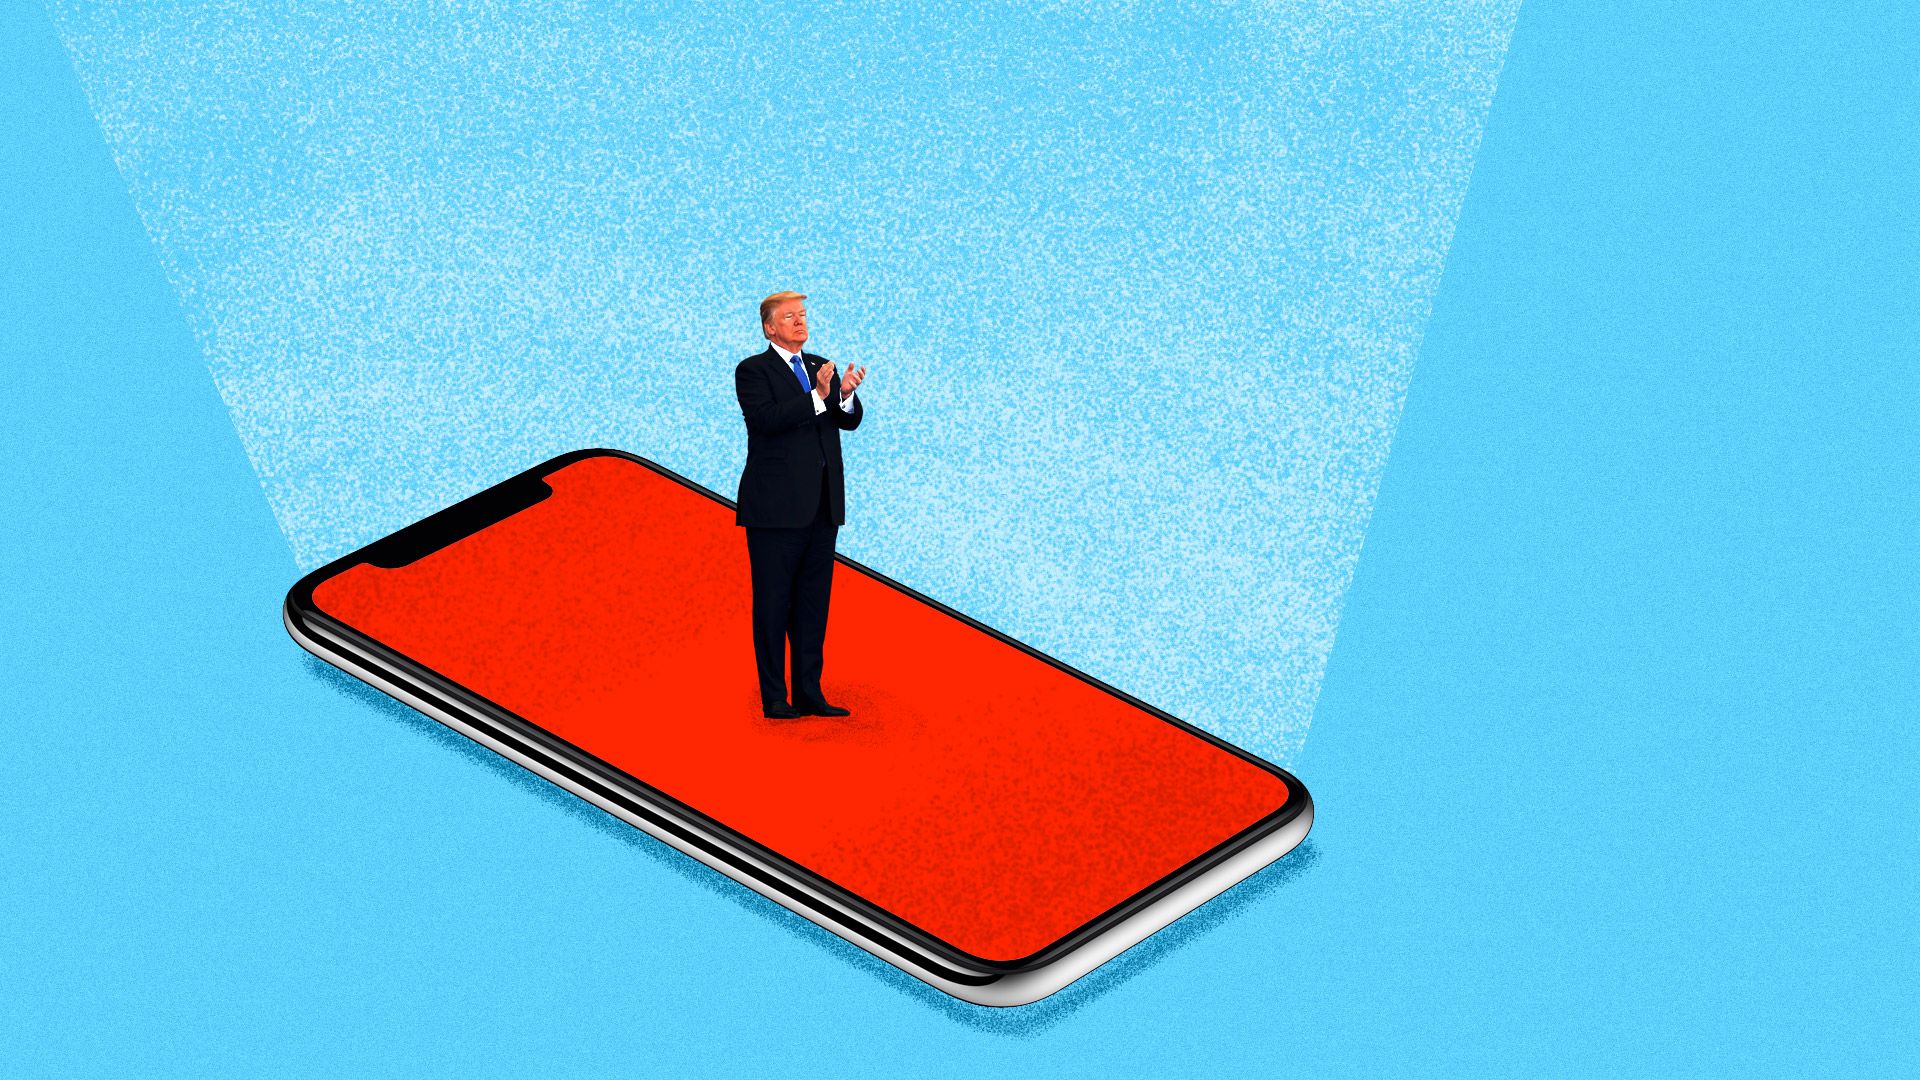 Illustration of Trump clapping on top of a cell phone